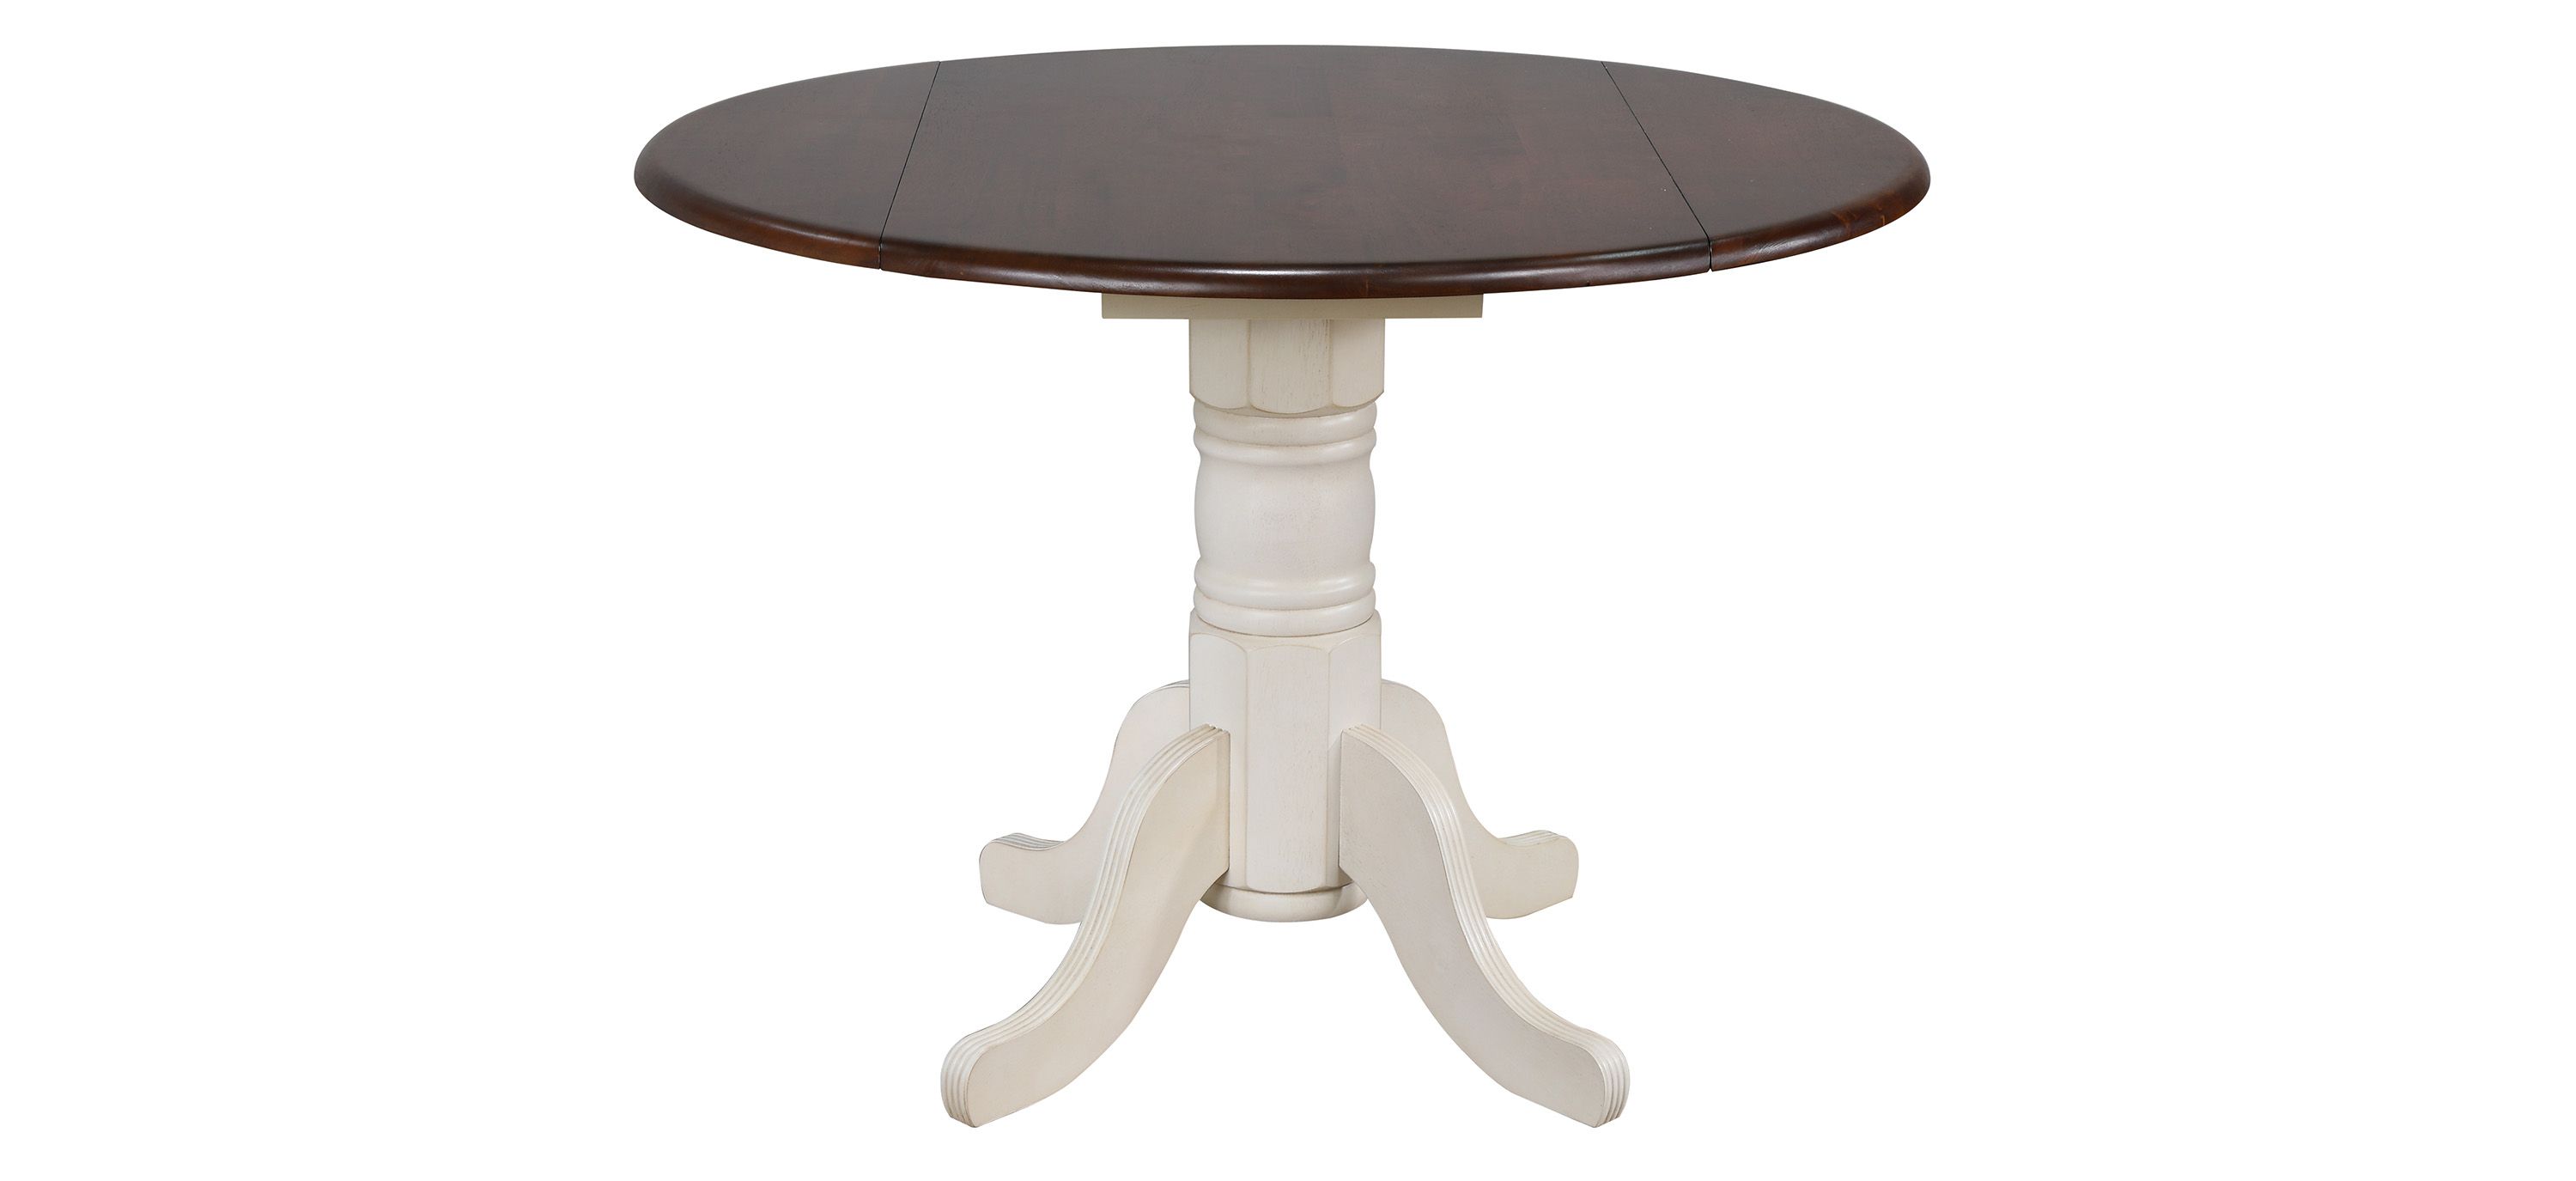 Fenway Round Drop Leaf Dining Table